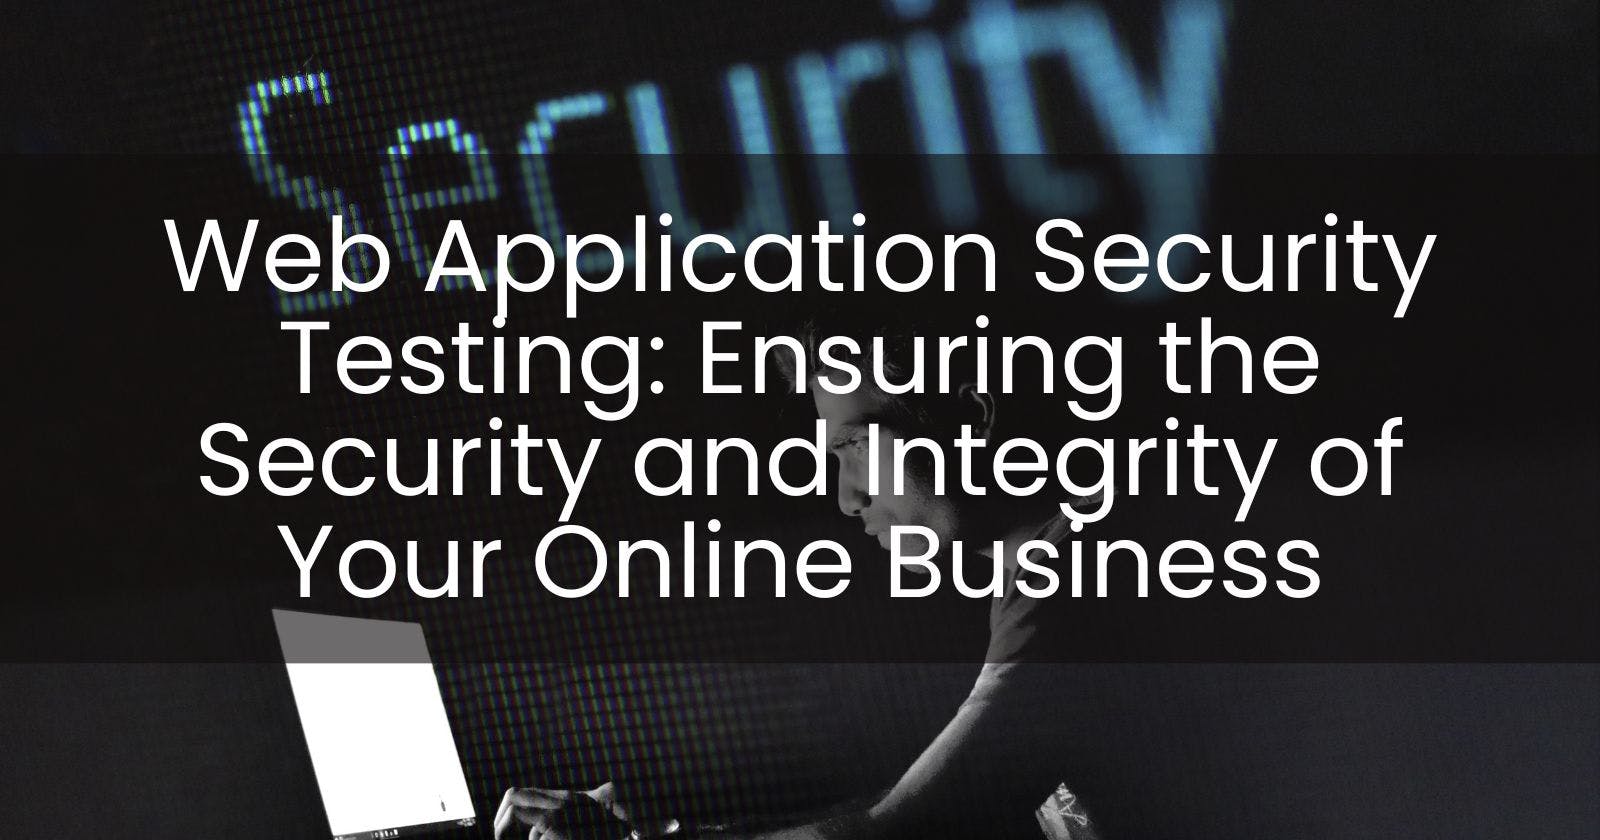 Web Application Security Testing: Ensuring the Security and Integrity of Your Online Business